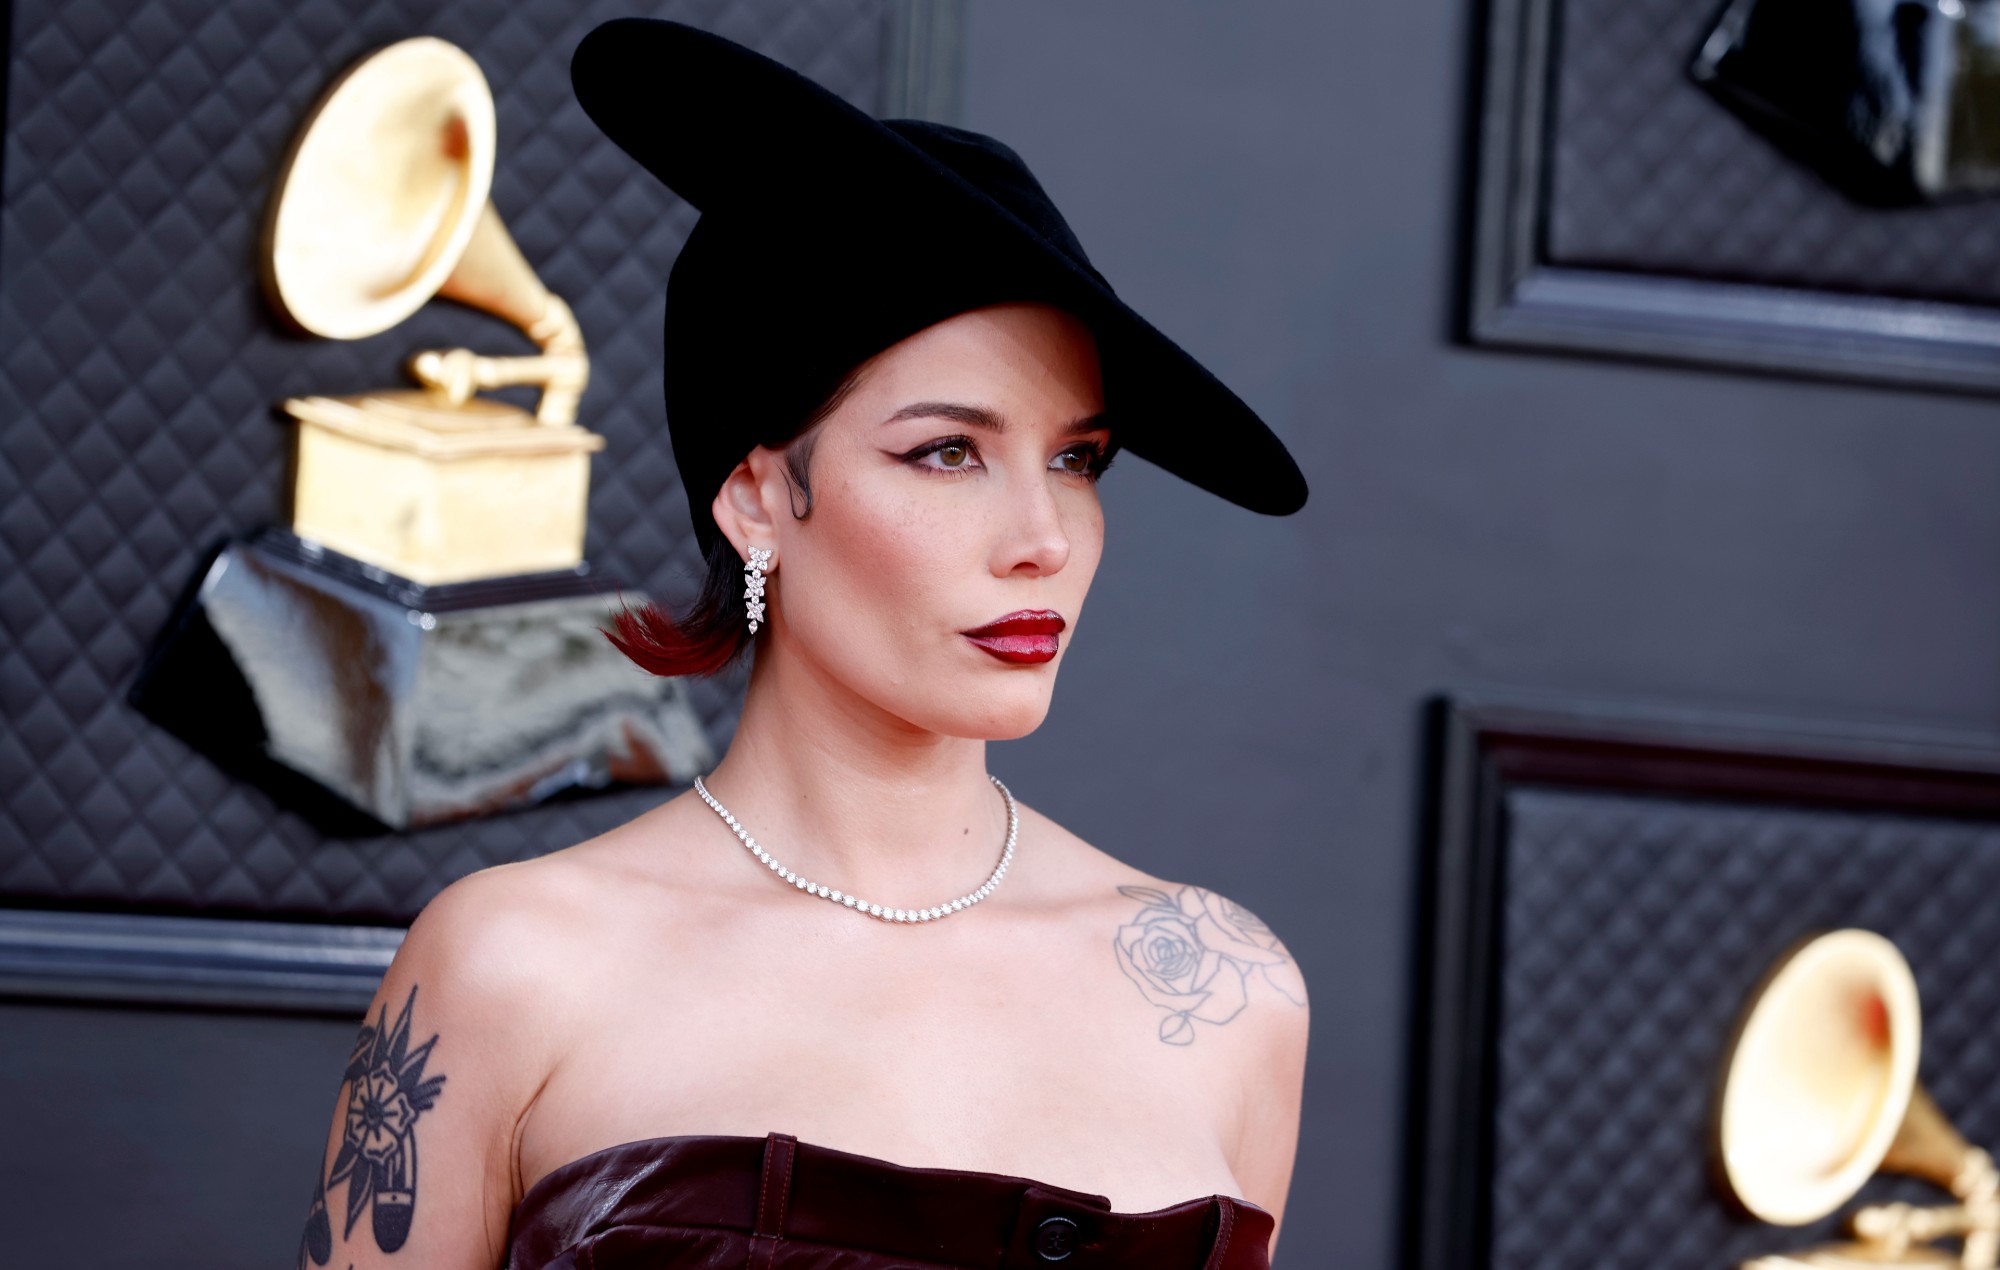 Halsey attended the 2022 Grammys a few days after surgery